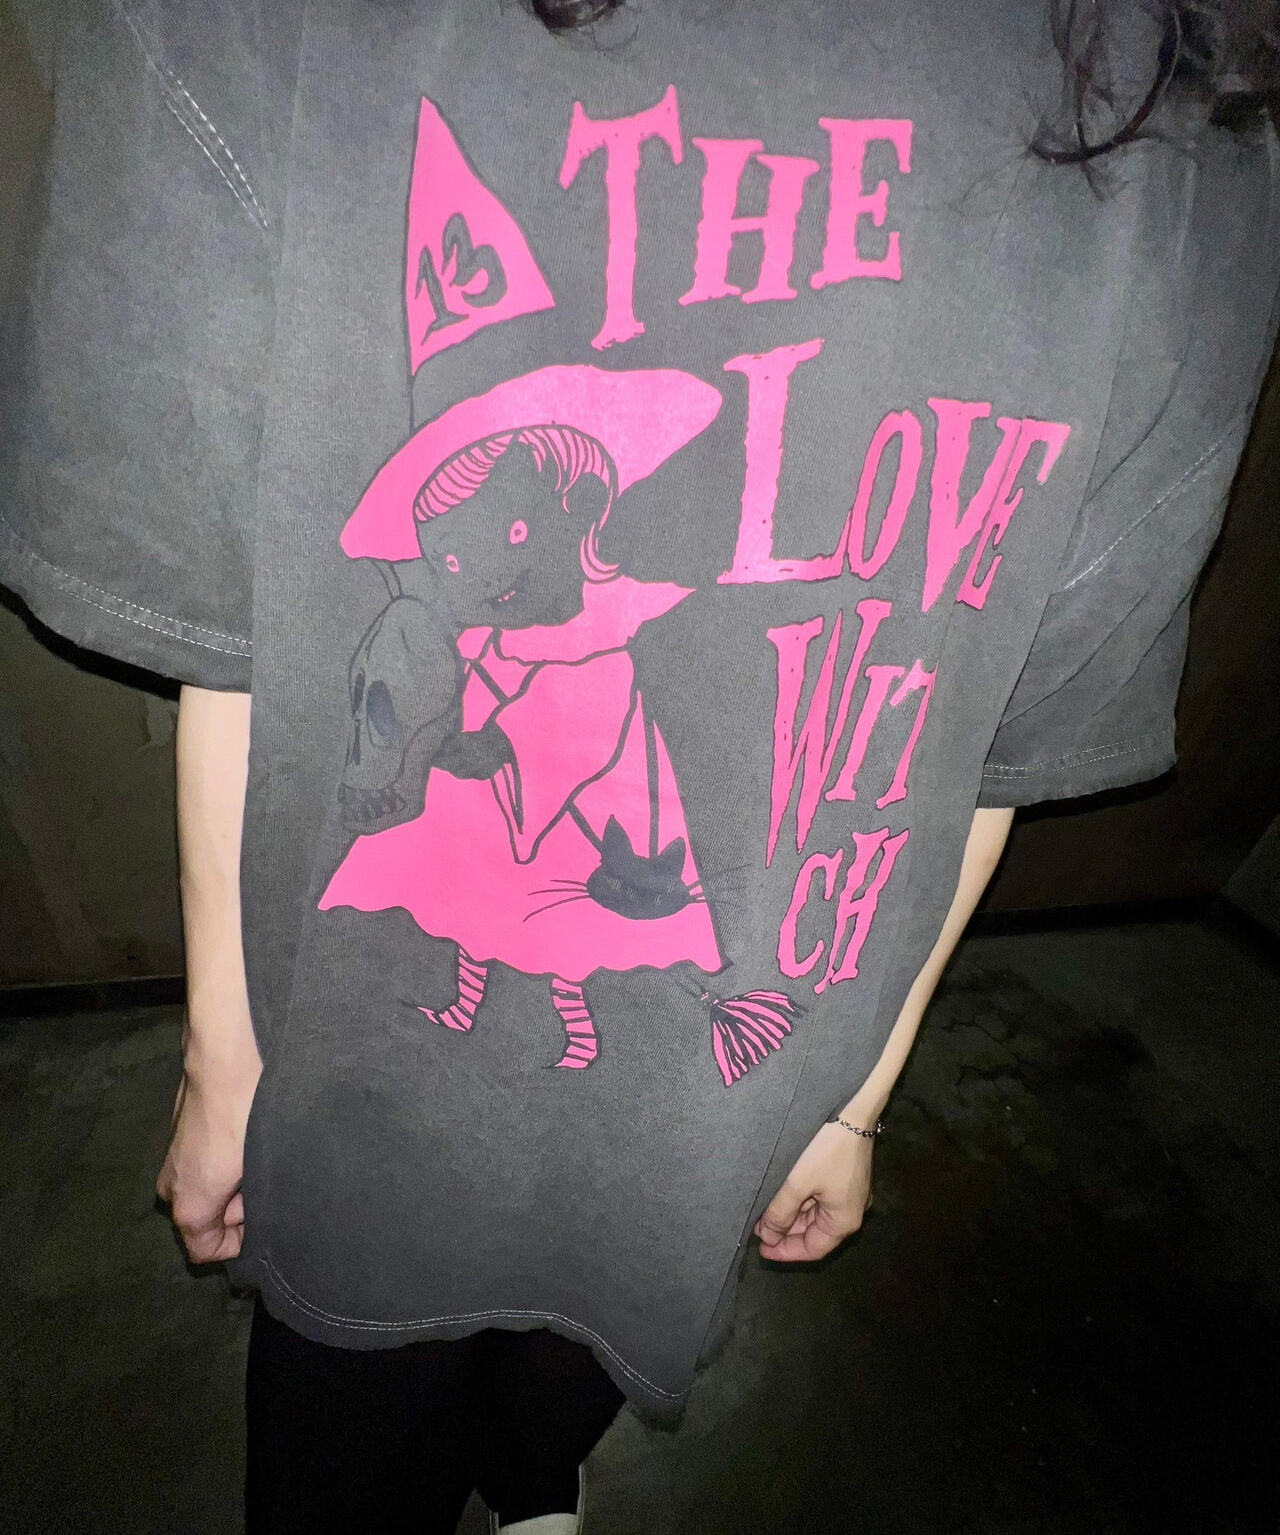 KIDILL/キディル/【LHP EXCLUSIVE】THE LOVE WITCH TEE